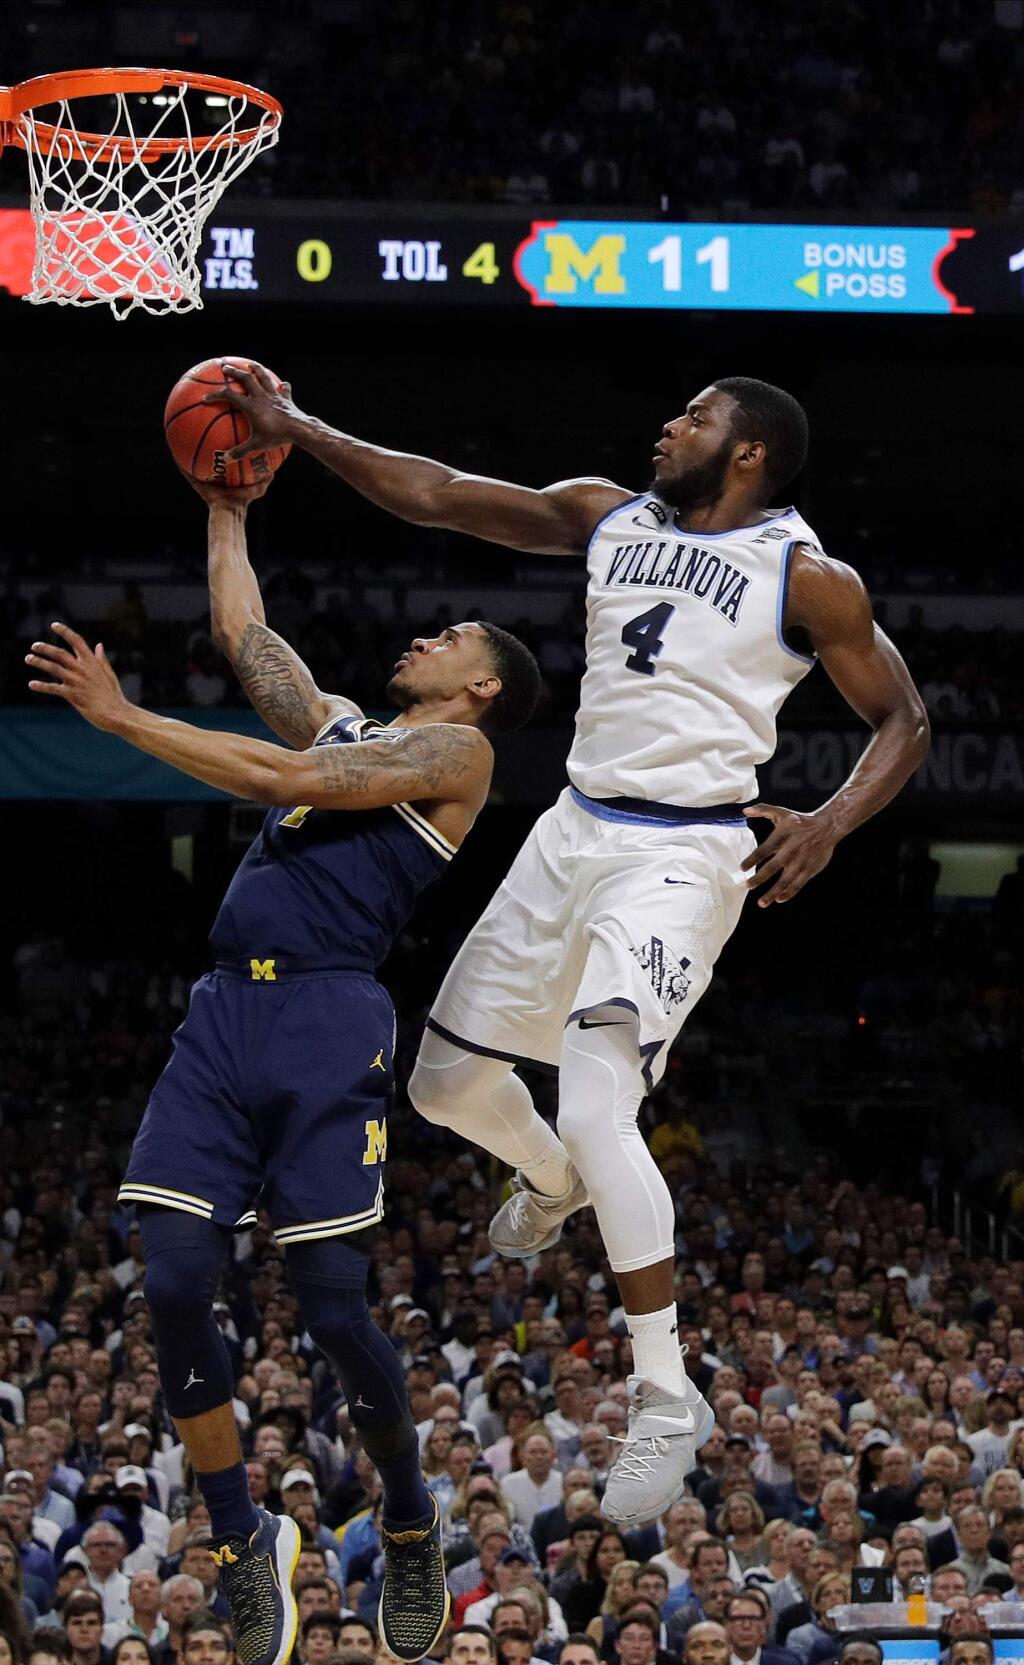 Villanova's Eric Paschall (4) blocks a shot by Michigan's Charles Matthews (1) during the first half in the championship game of the Final Four NCAA college basketball tournament, Monday, April 2, 2018, in San Antonio. (AP Photo/David J. Phillip)